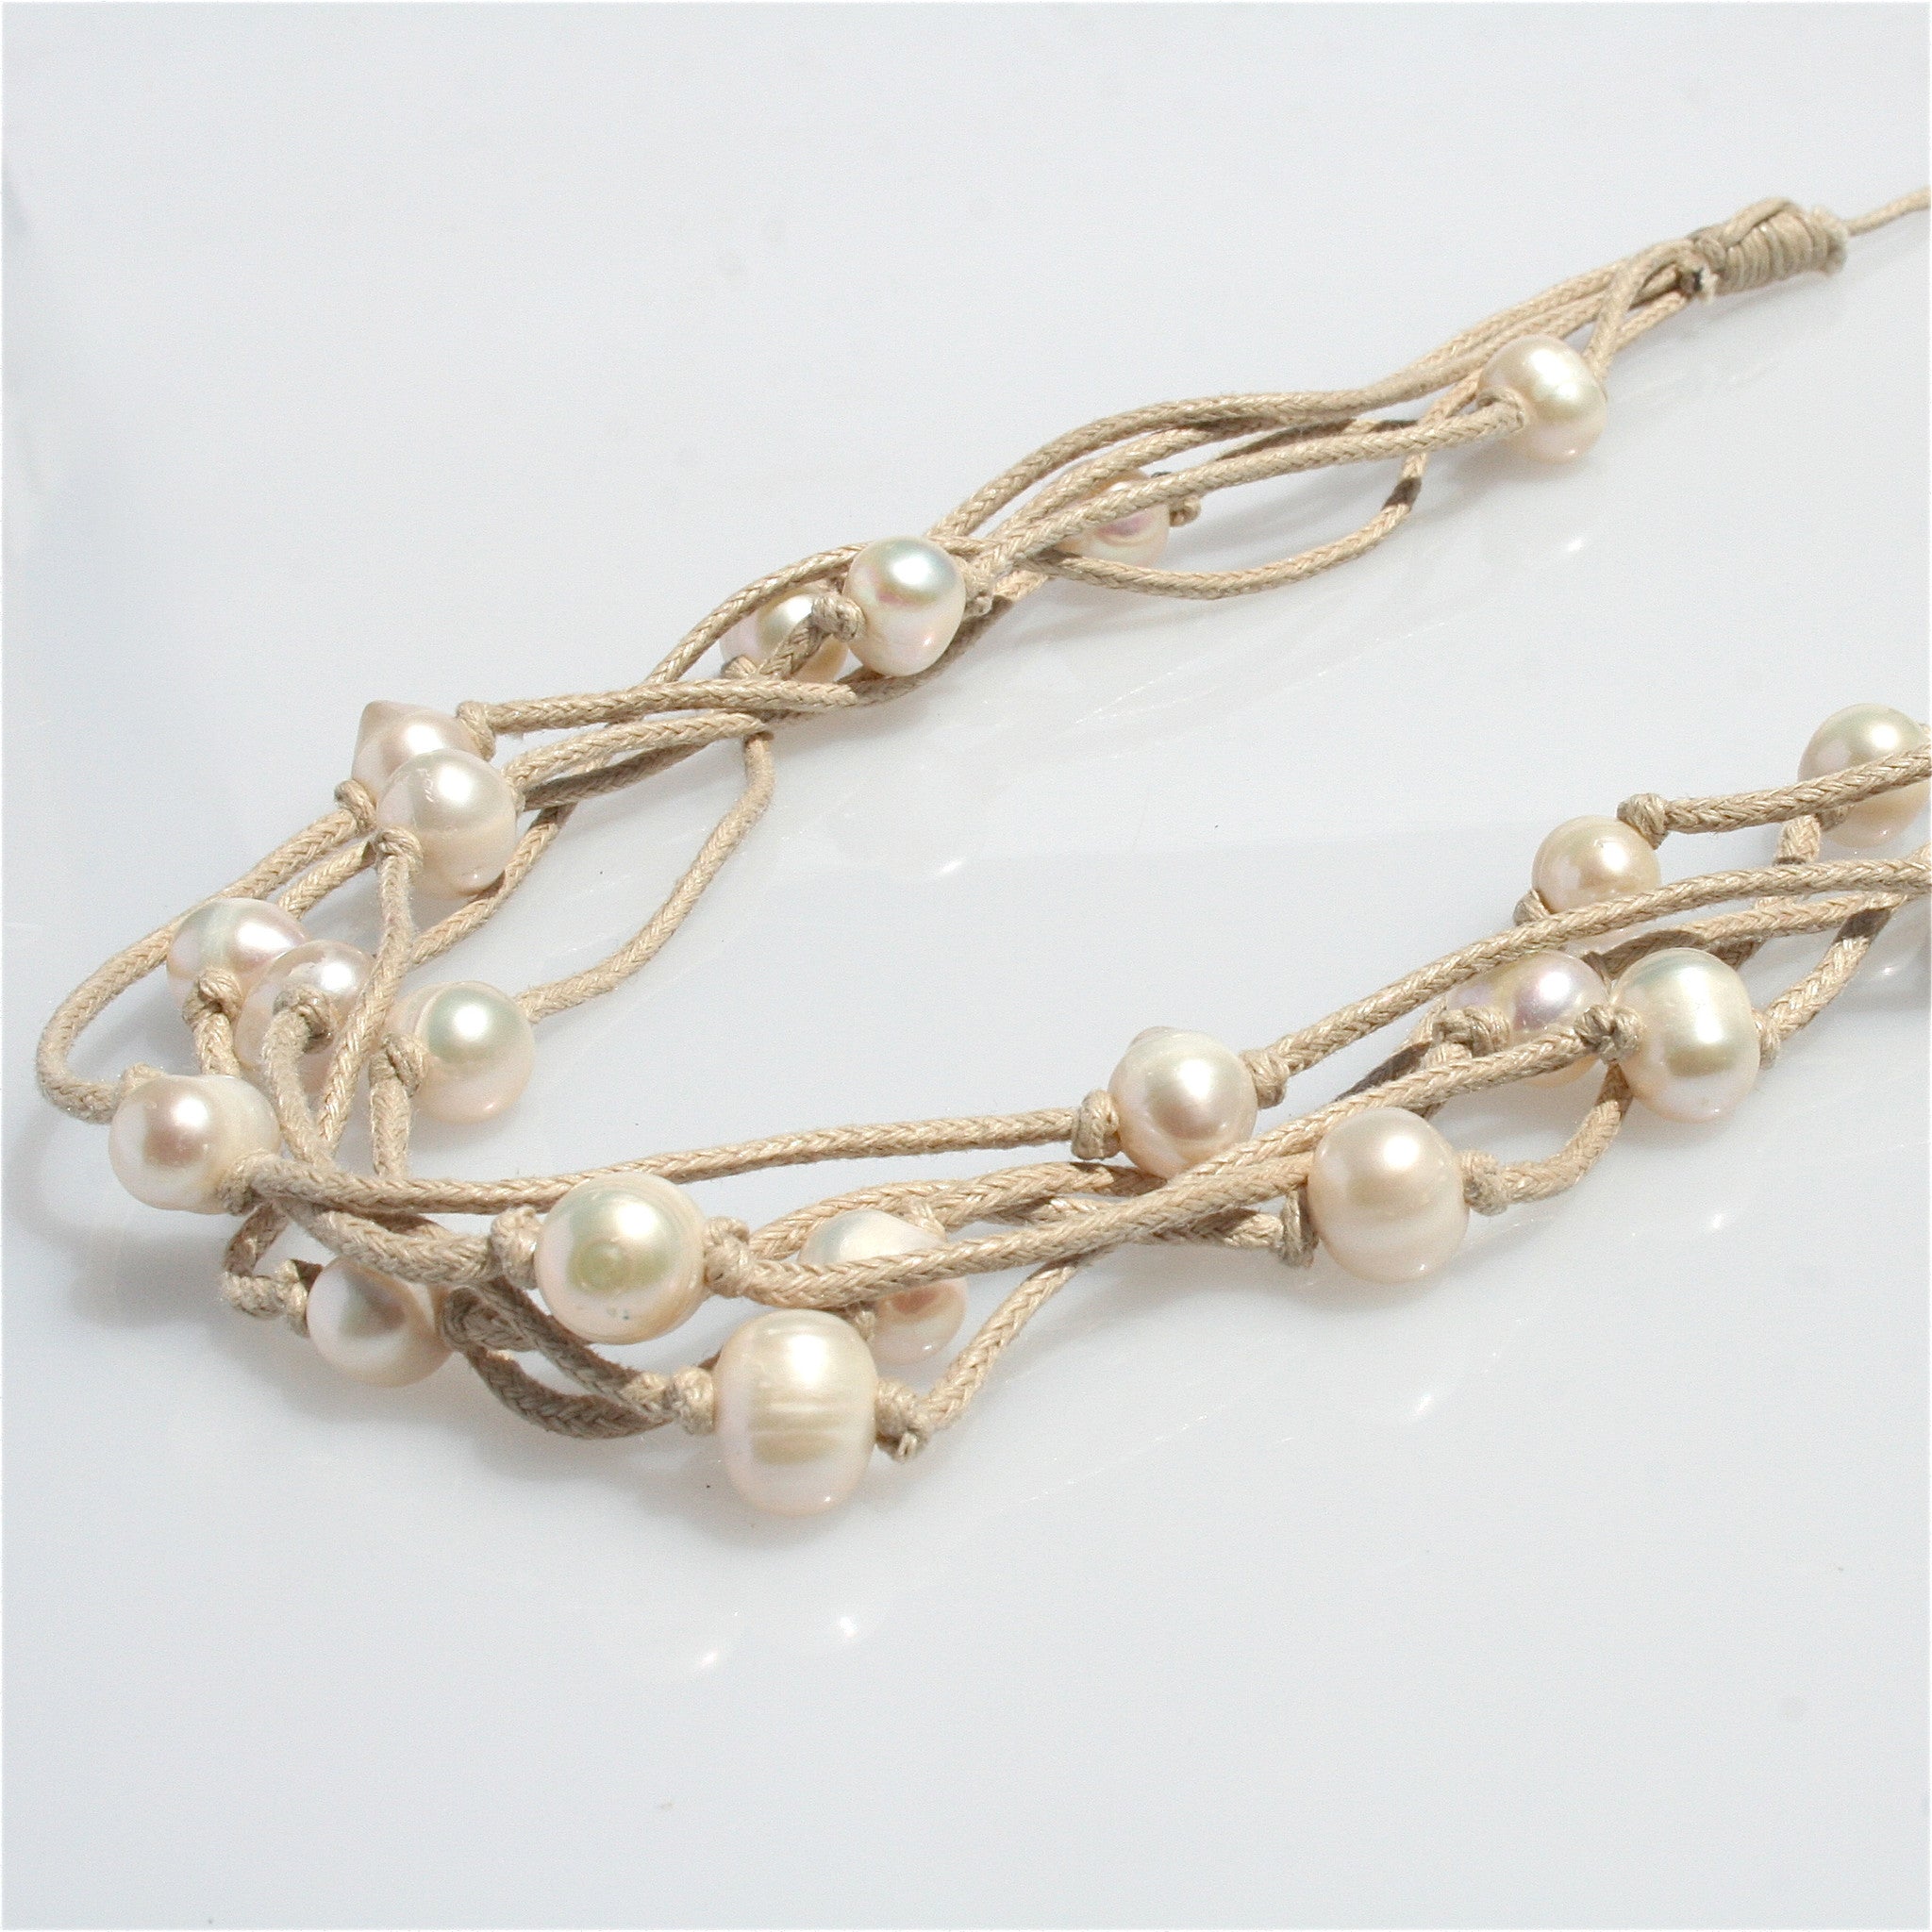 necklace with pearls